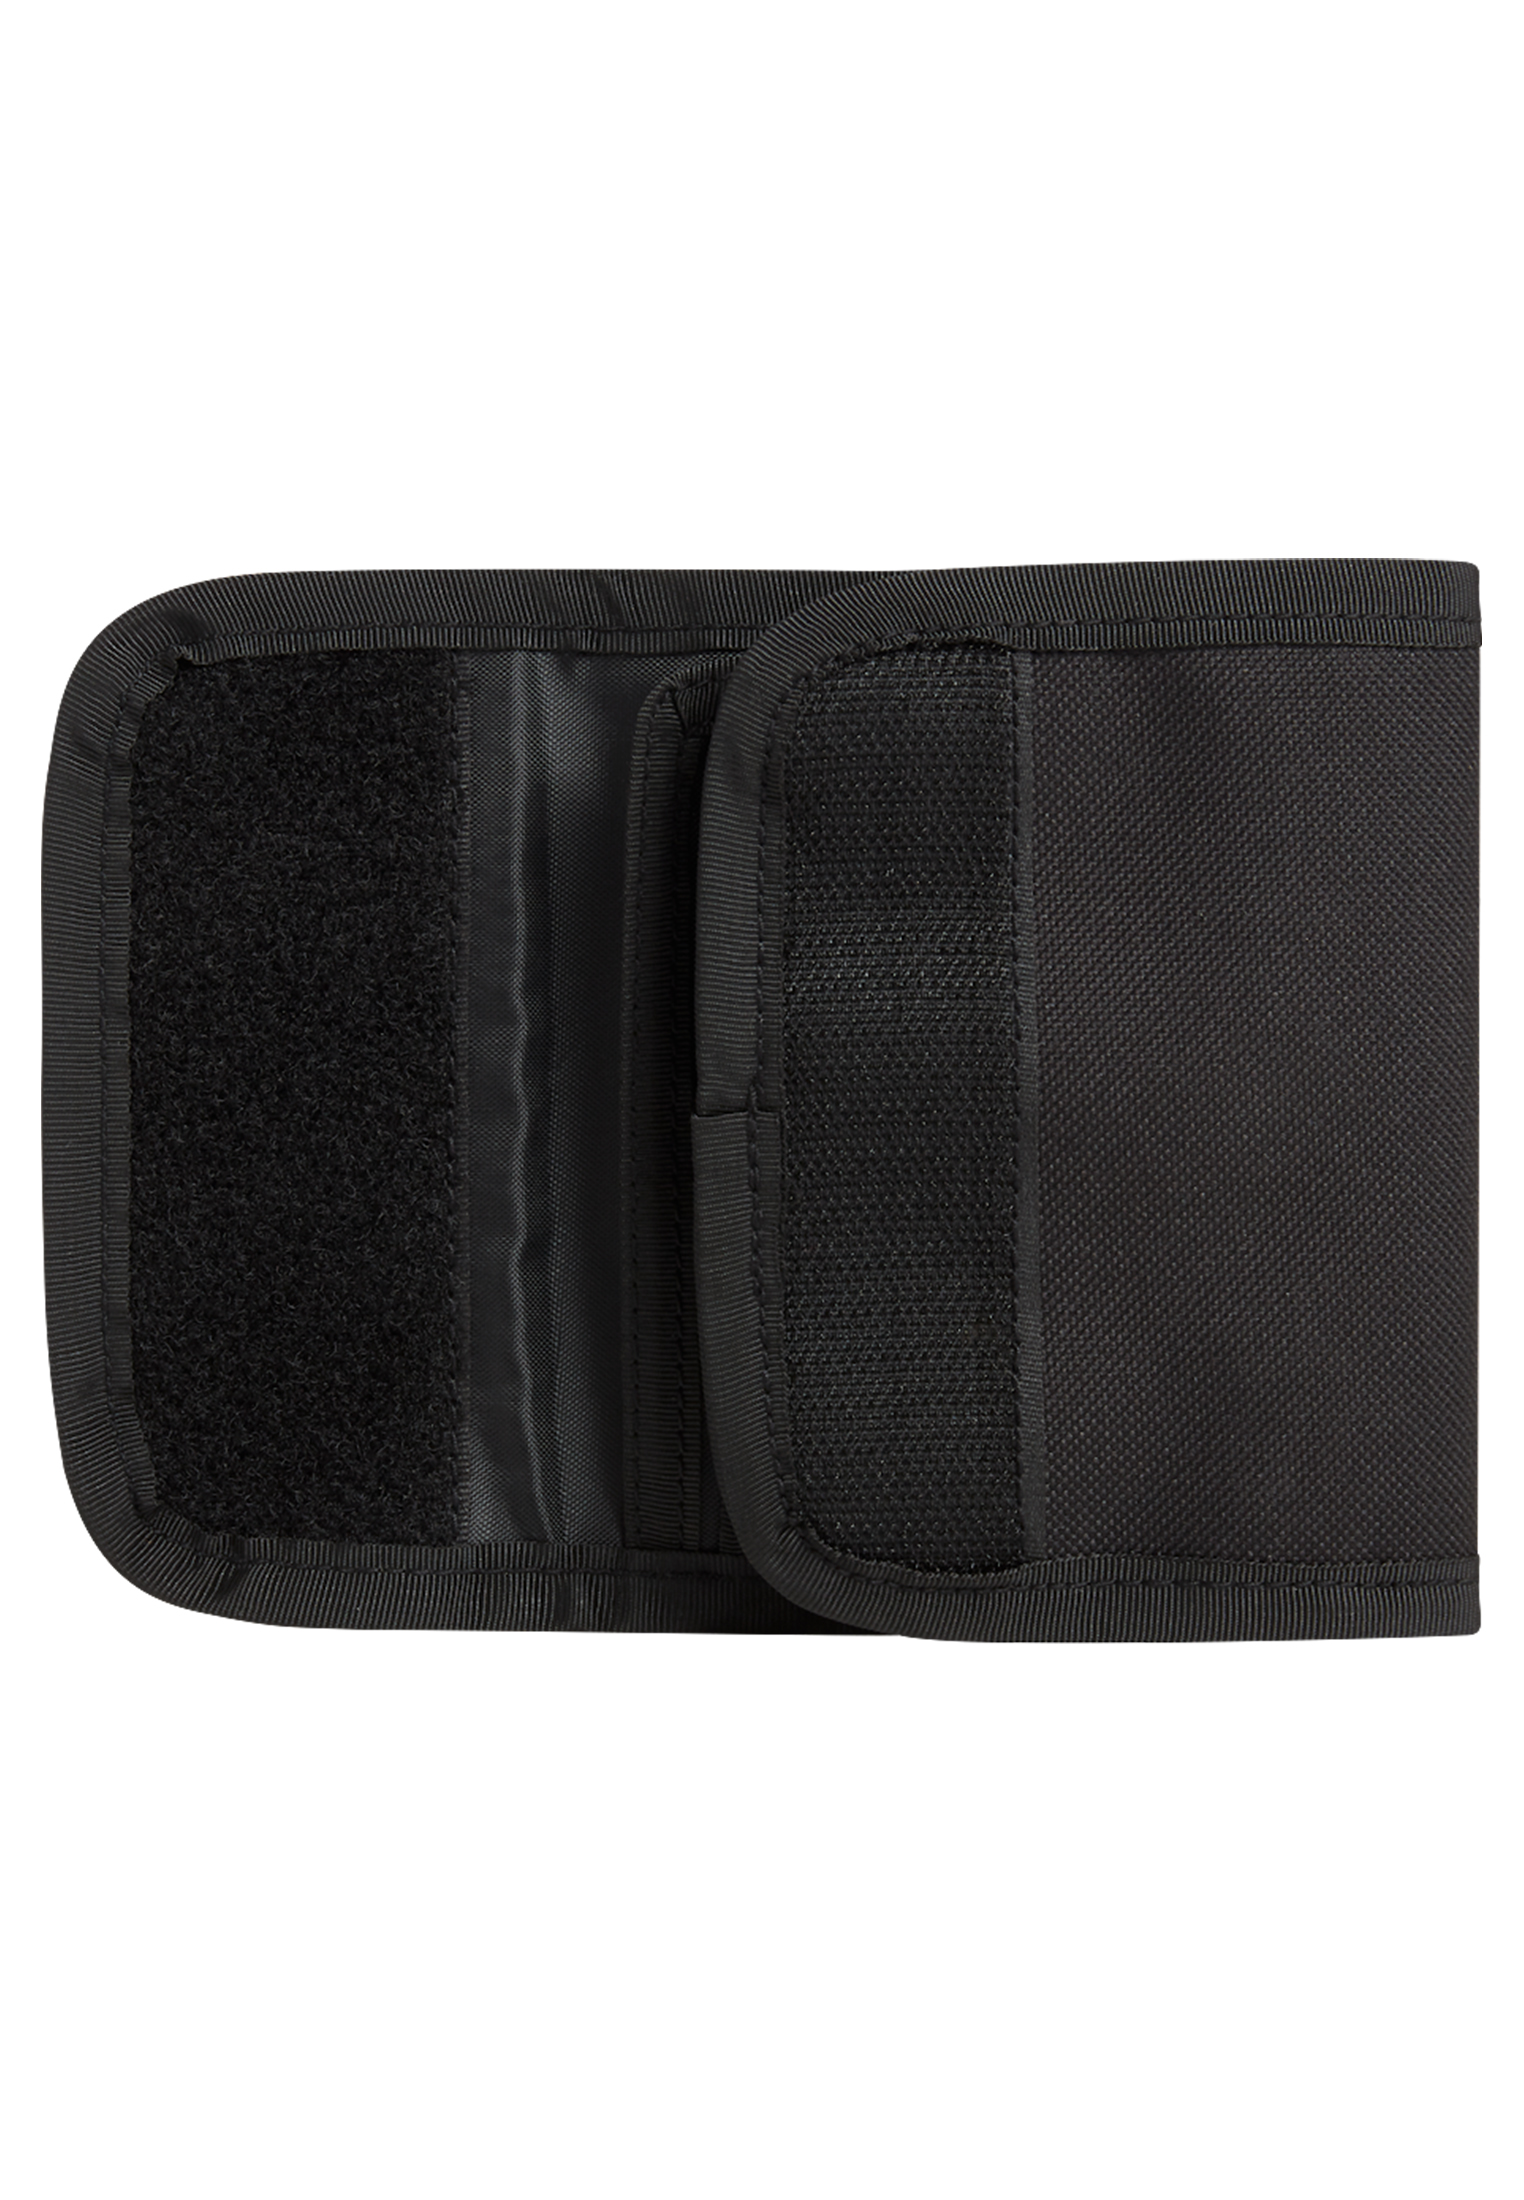 Accessoires wallet five in Farbe black